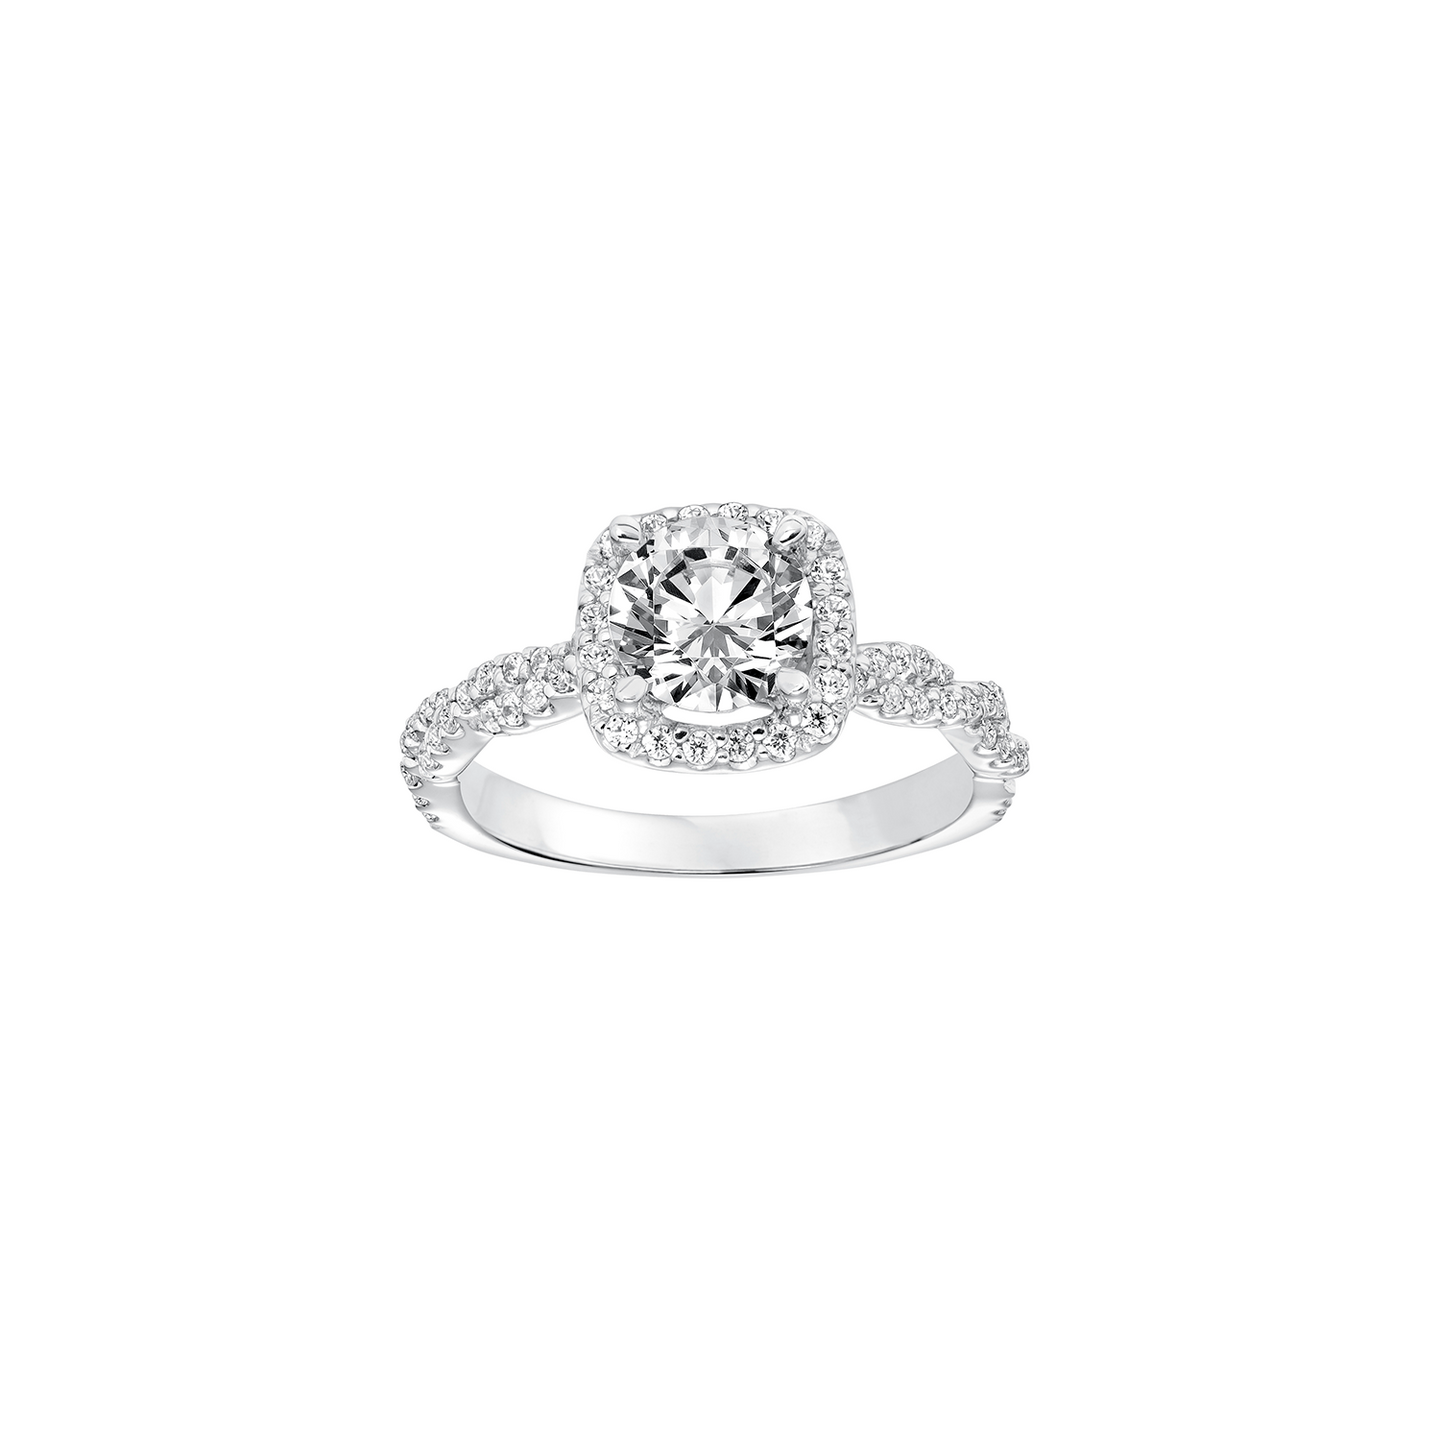 Fink's Exclusive 14K White Gold Round Diamond Halo and Diamond Engagement Ring in .50ct